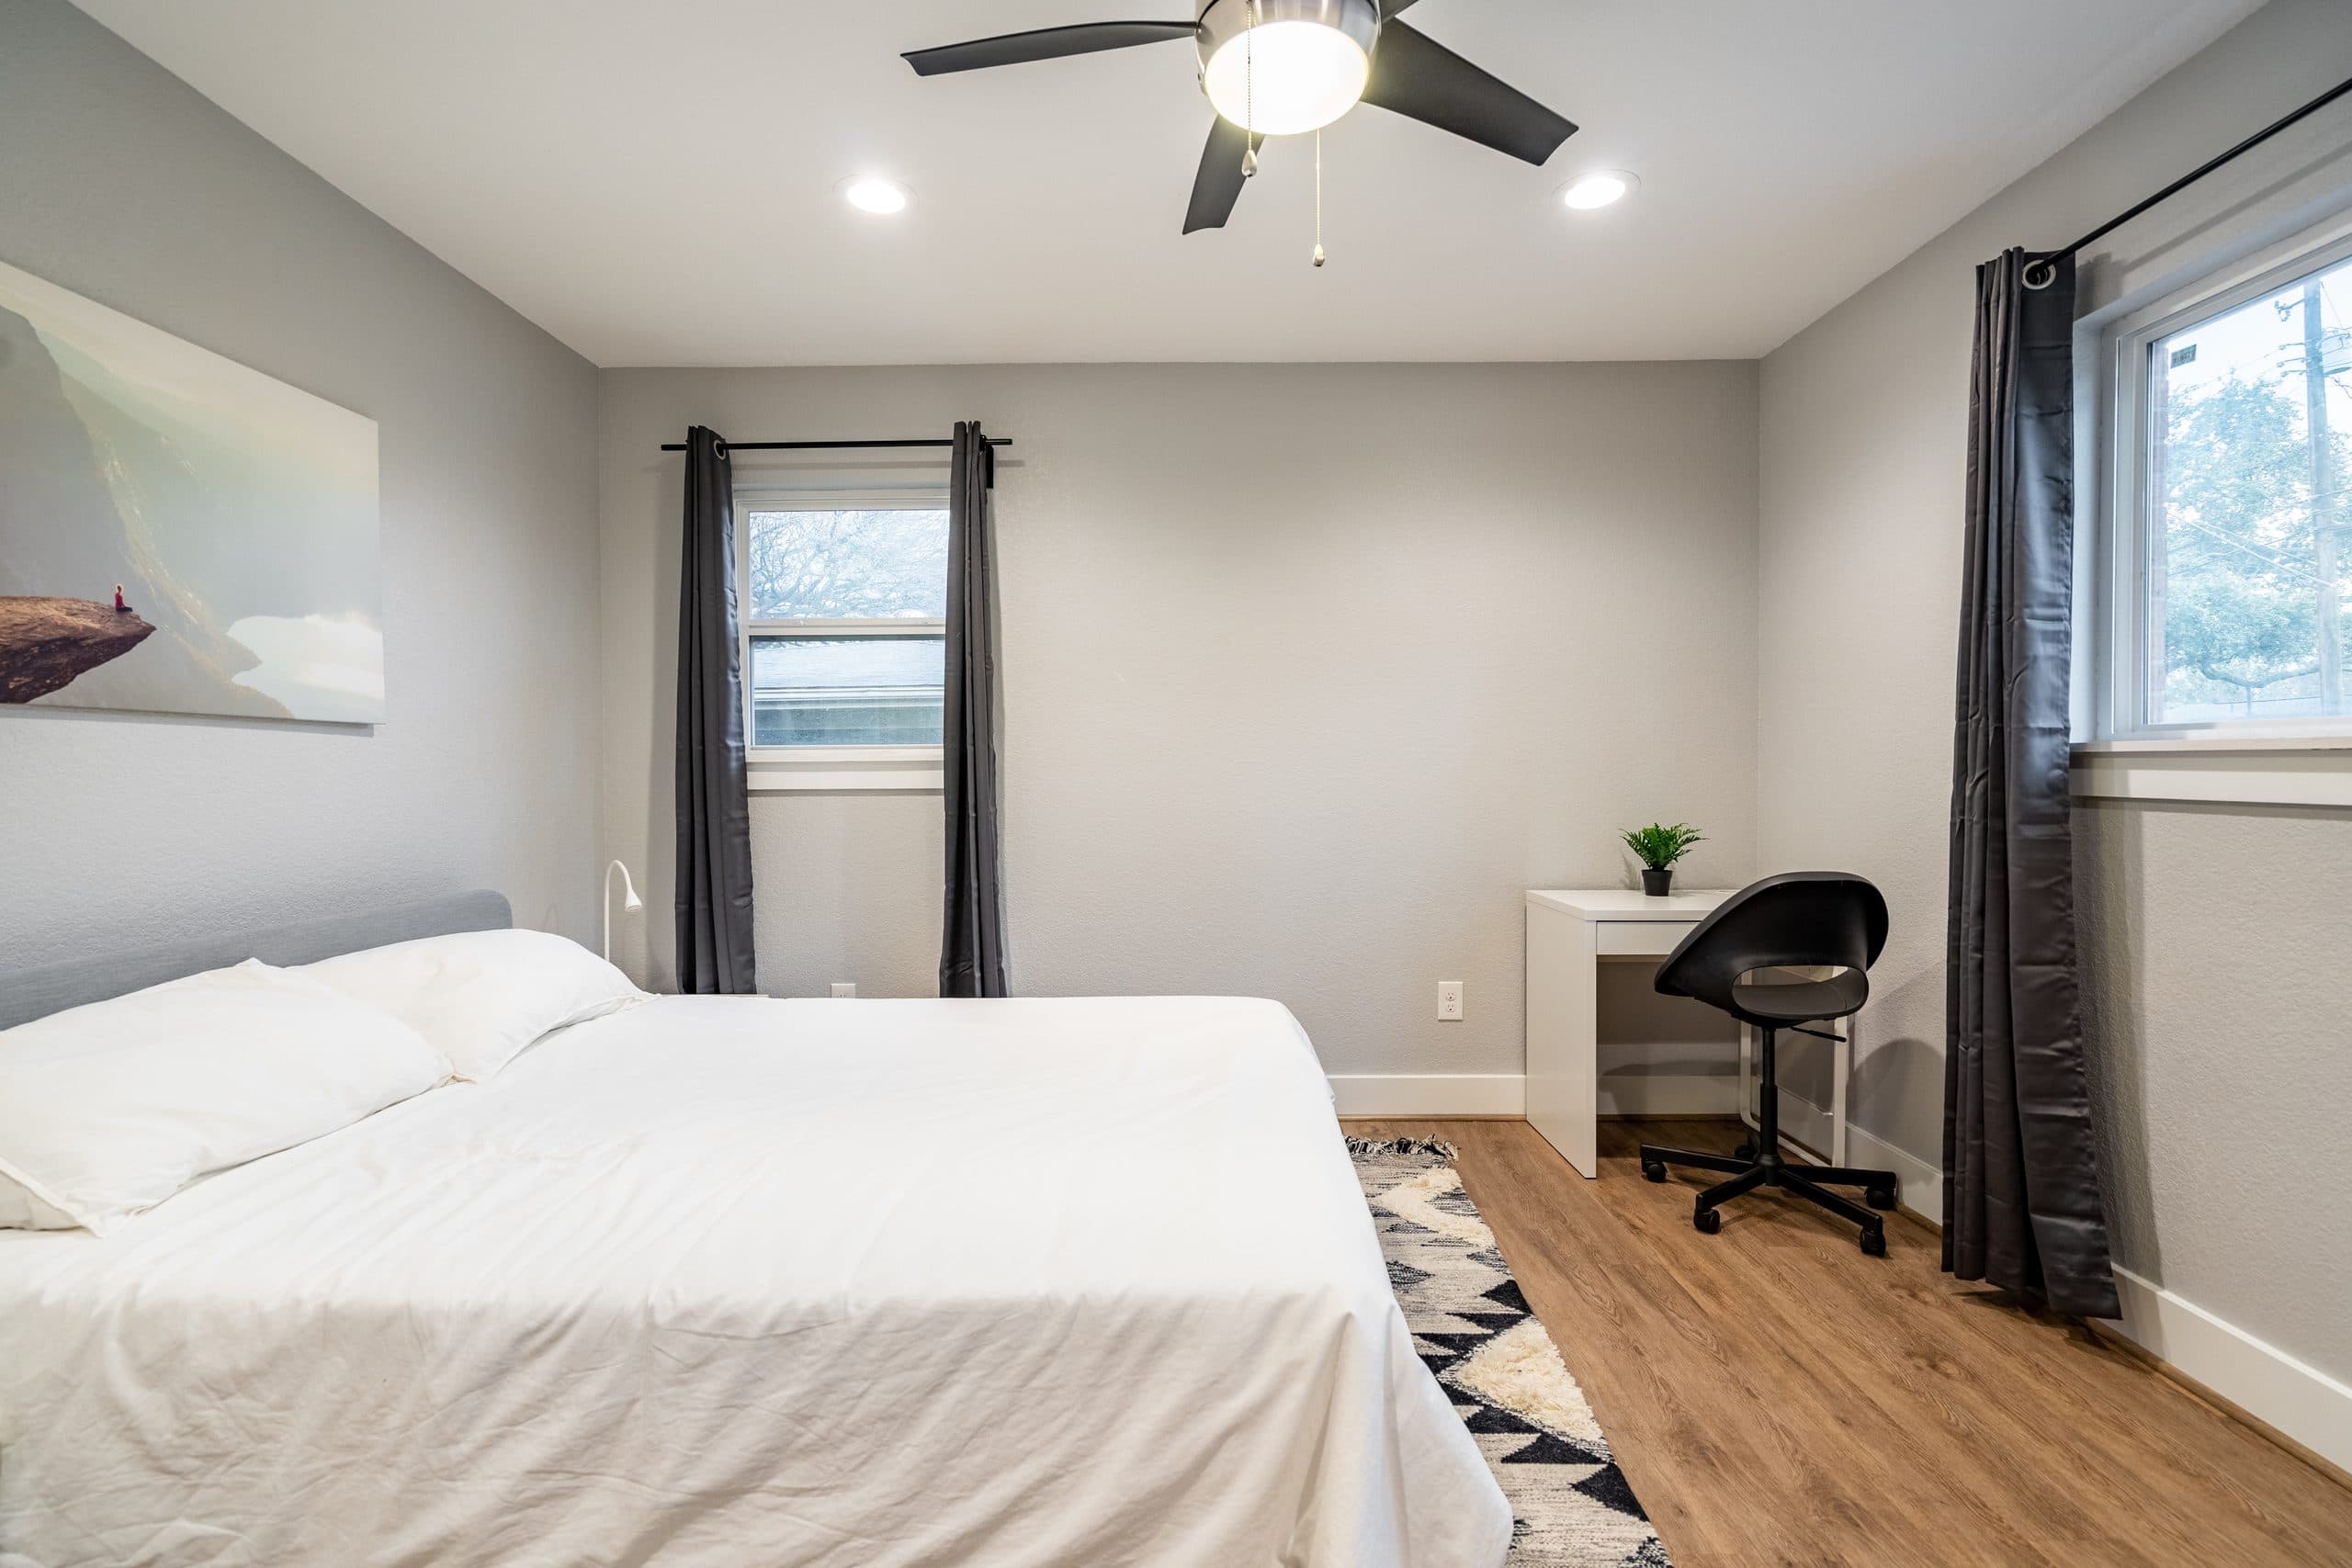 Photo 35 of #2249: Queen Bedroom A at June Homes